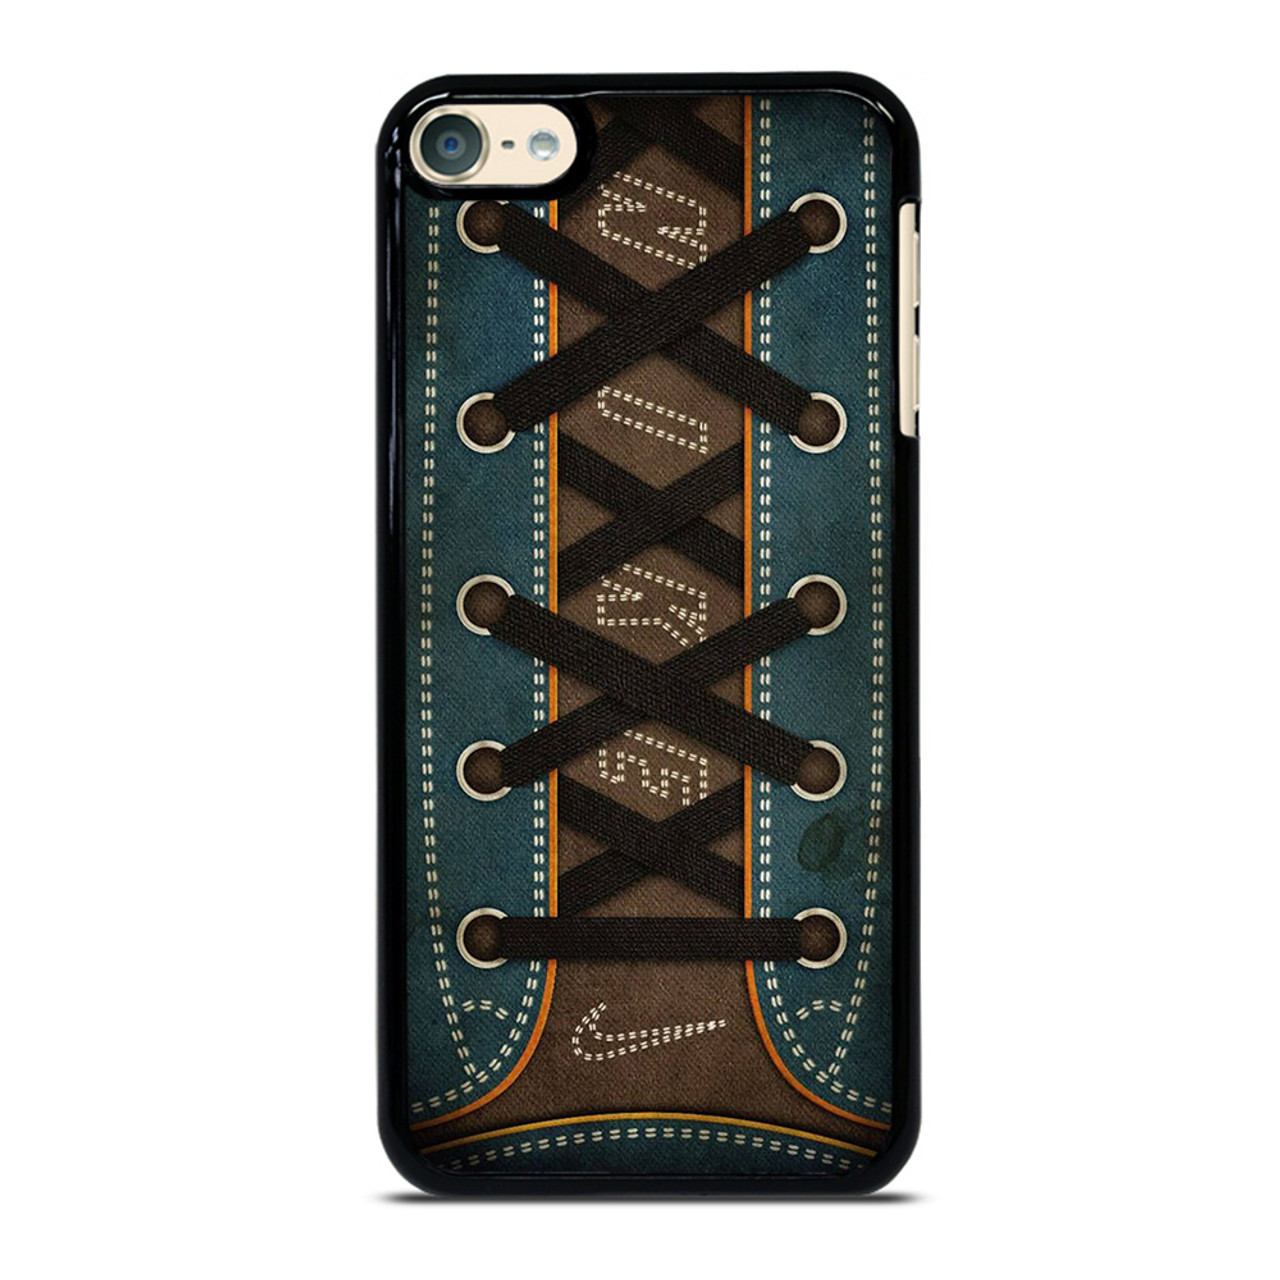 NIKE LOGO SHOE LACE ICON iPod Touch 6 Case Cover